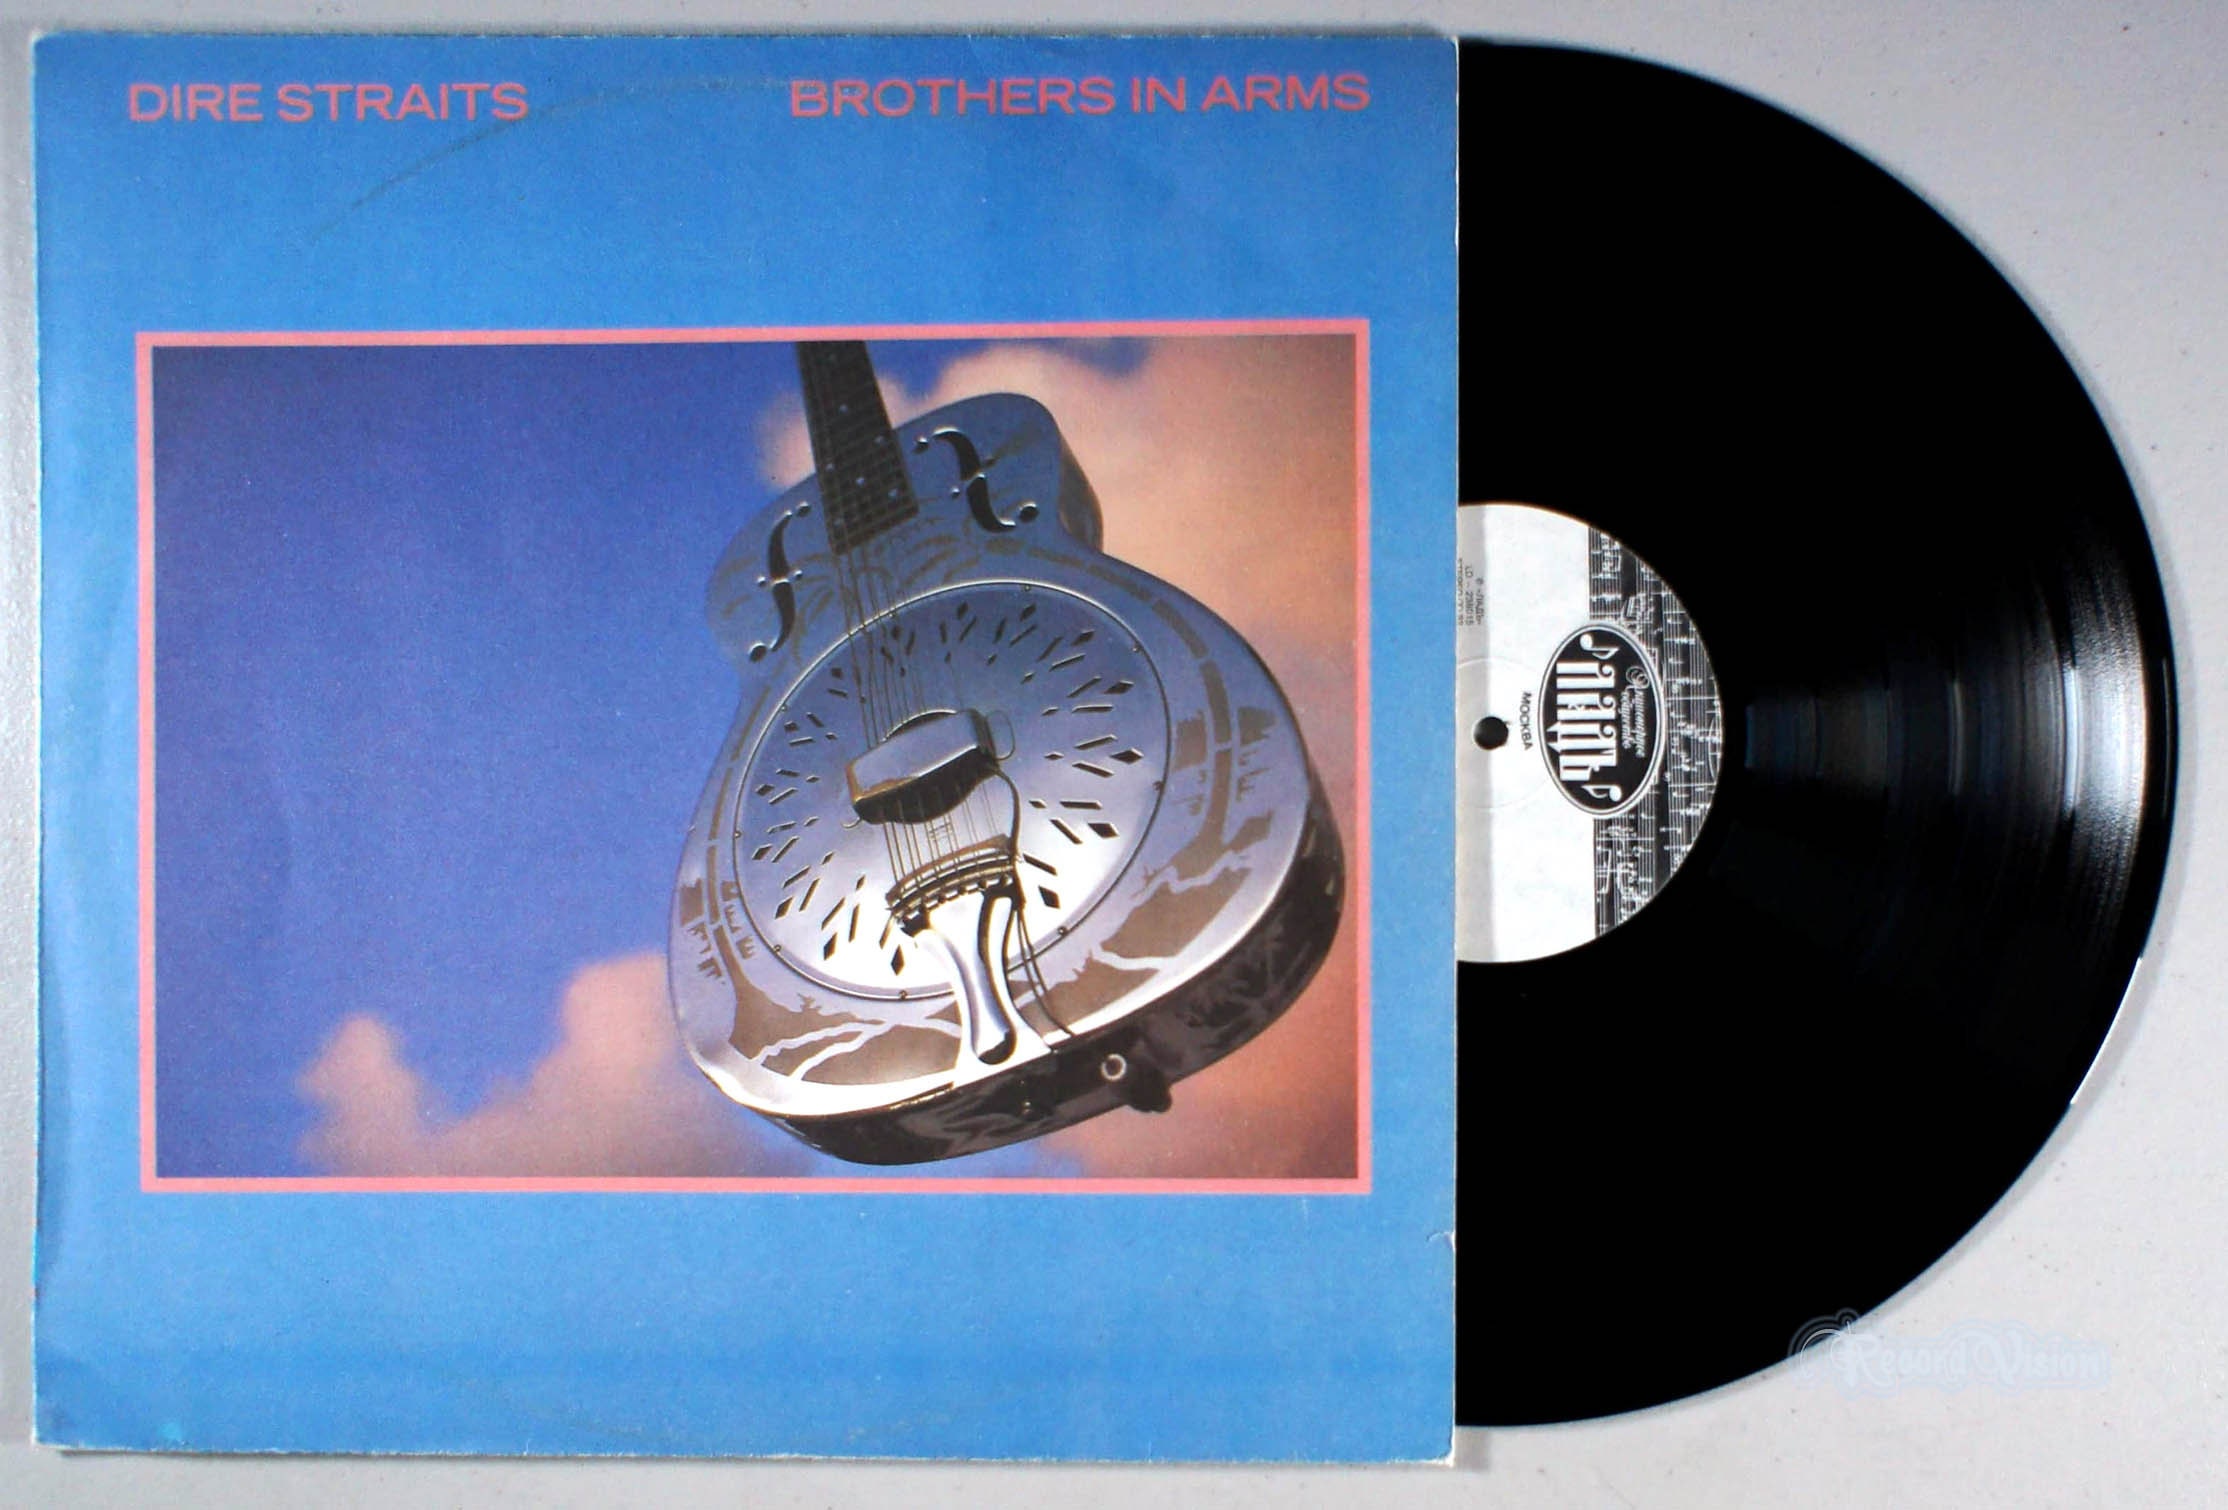 Dire Straits - Brothers in Arms (1985) Vinyl LP - So Far Away, Money for  Nothing